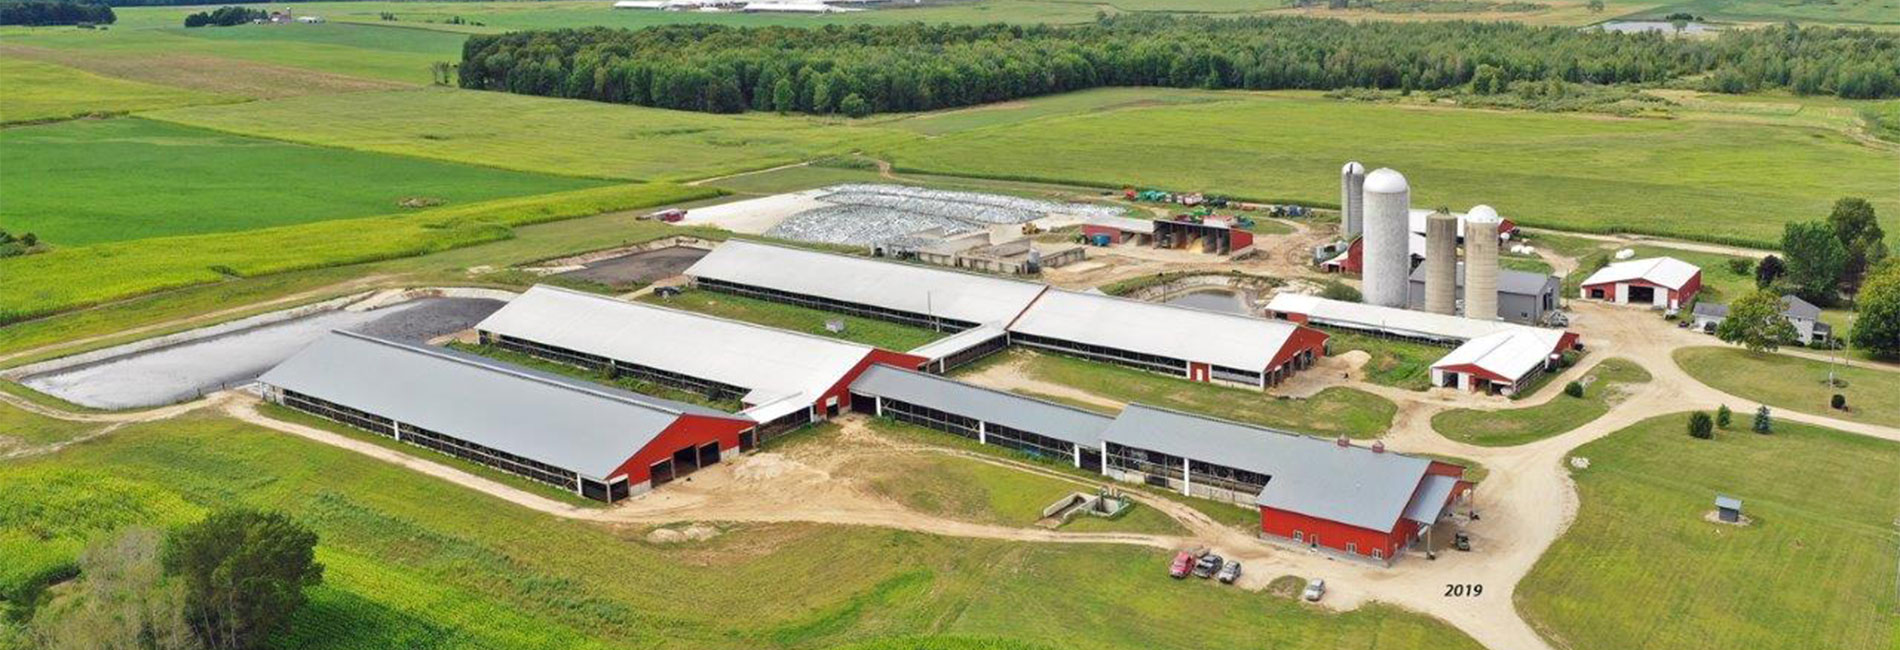 Agricultural Building Design and Construction Services